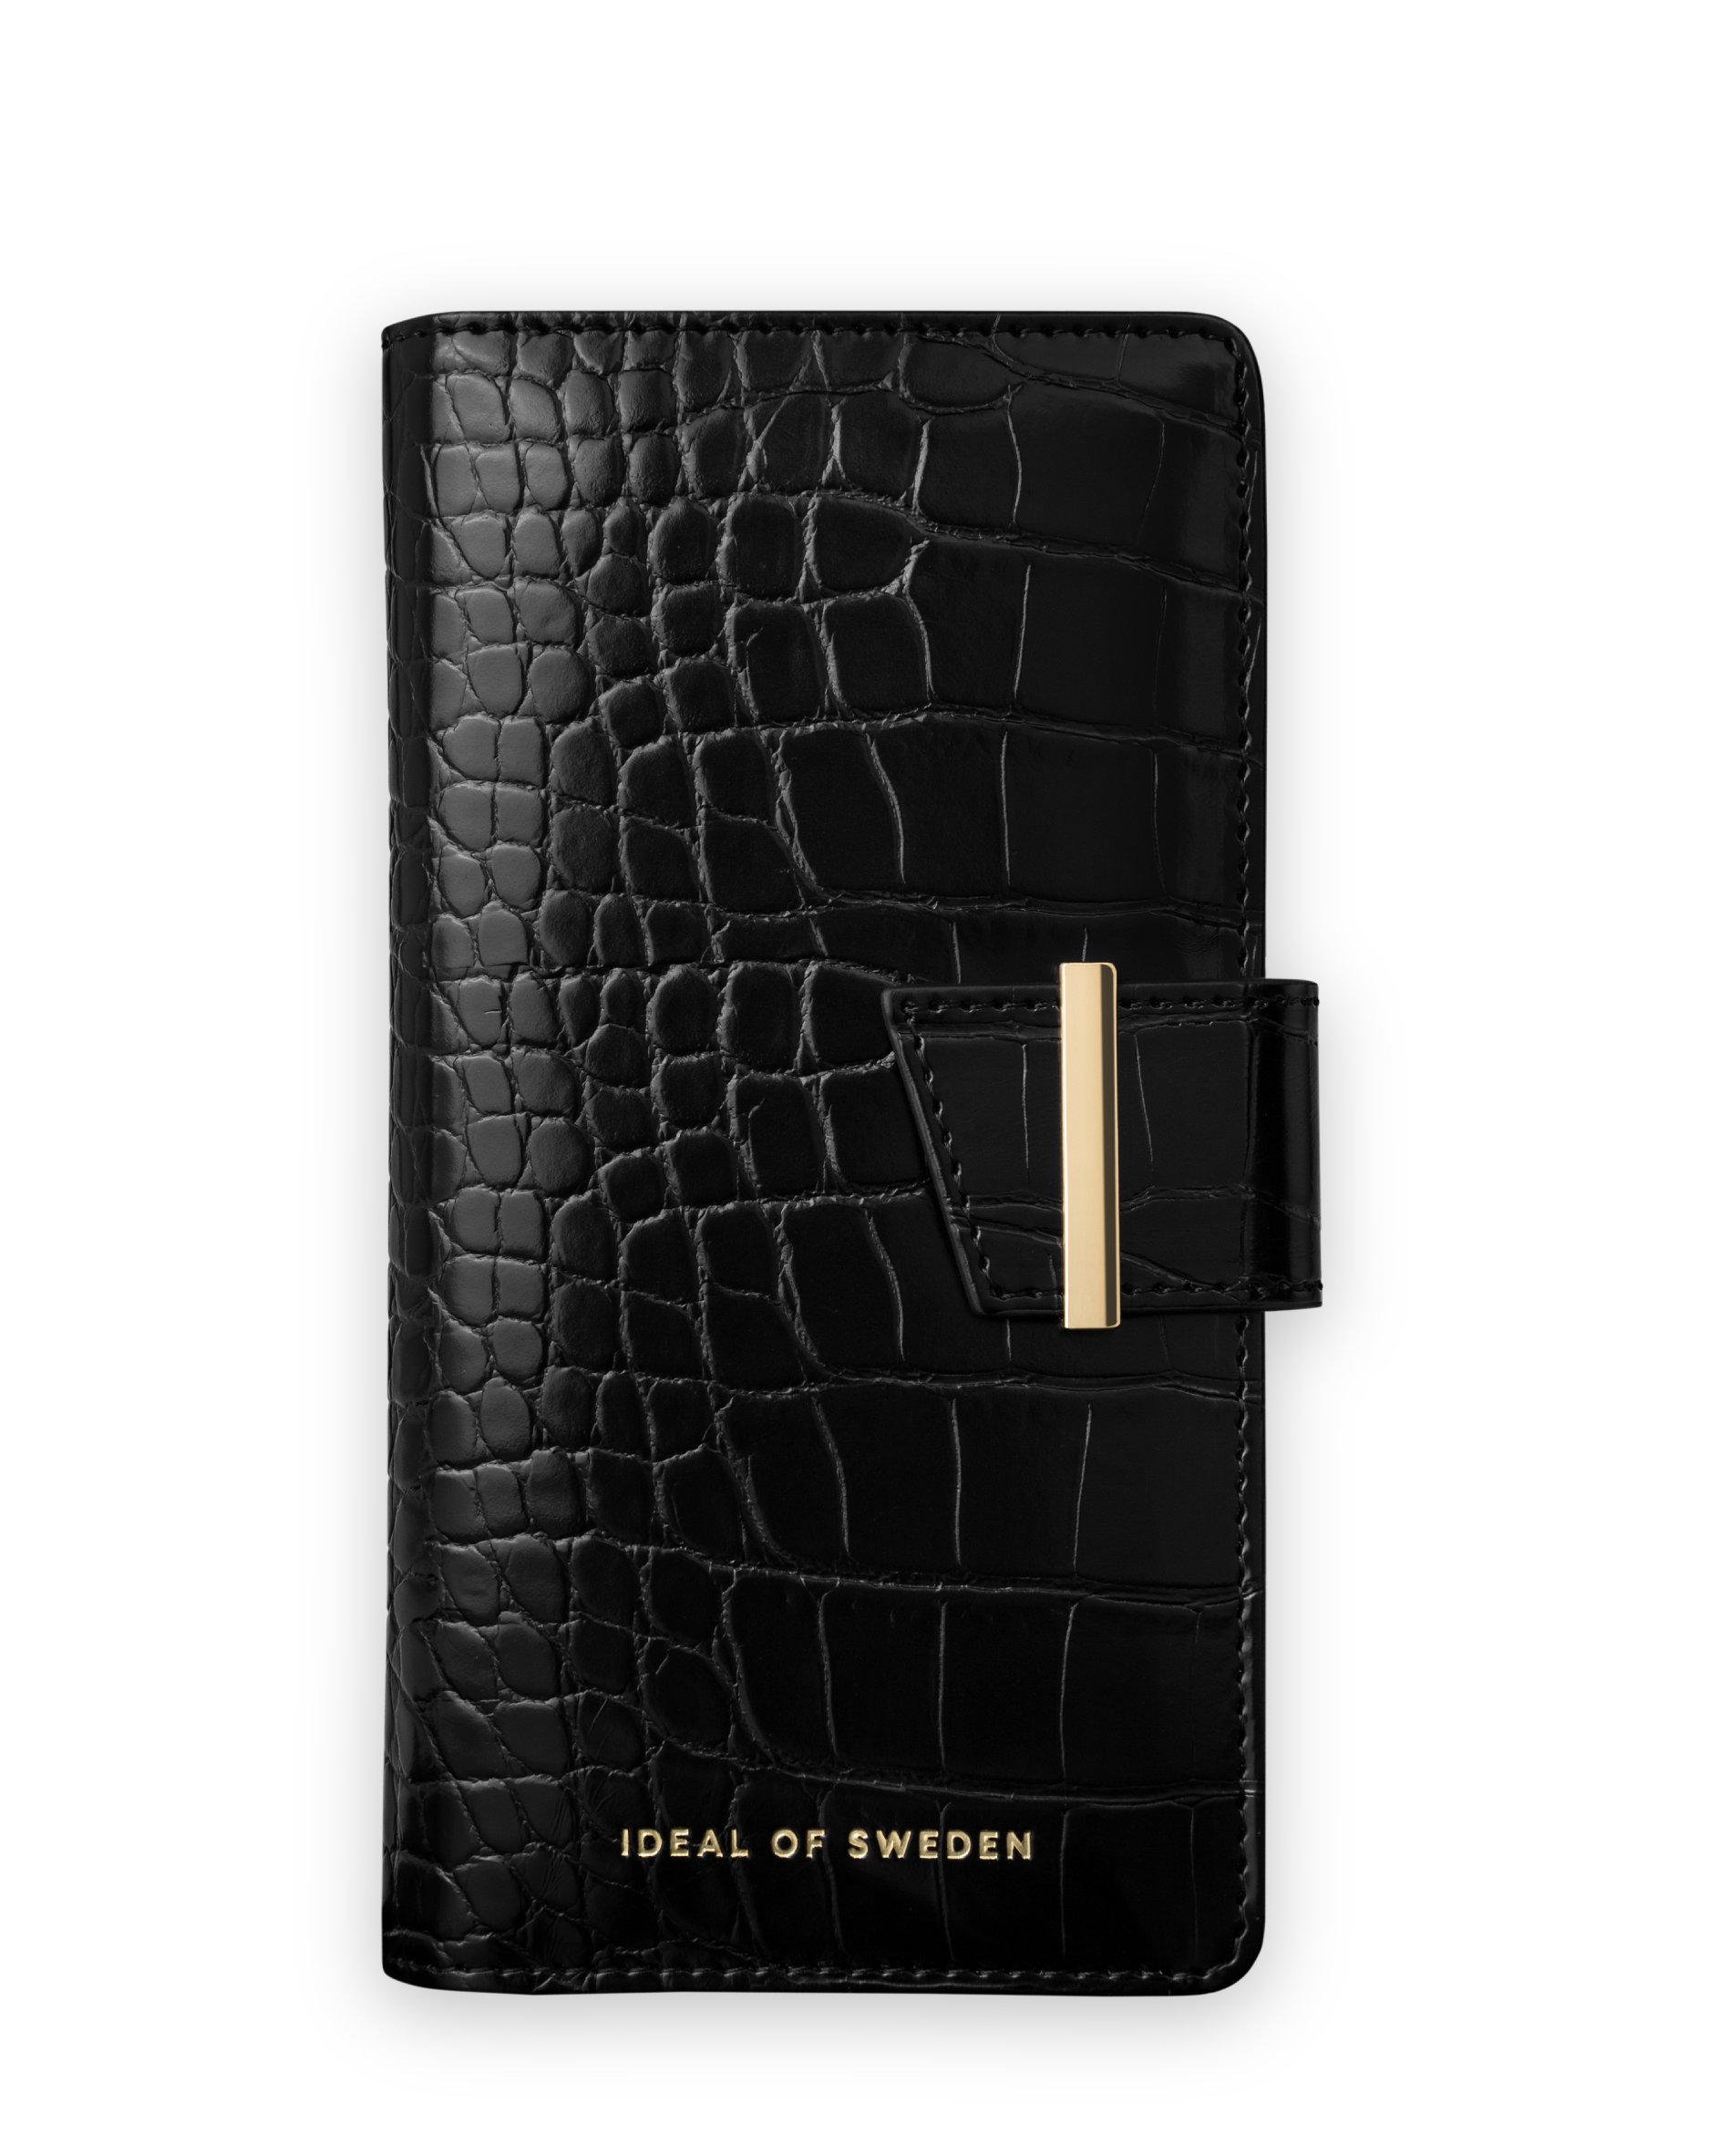 OF SWEDEN 13 Bookcover, Jet Black Apple, iPhone IDPWSS22-I2161P-207, Pro, Recycled - IDEAL Croco